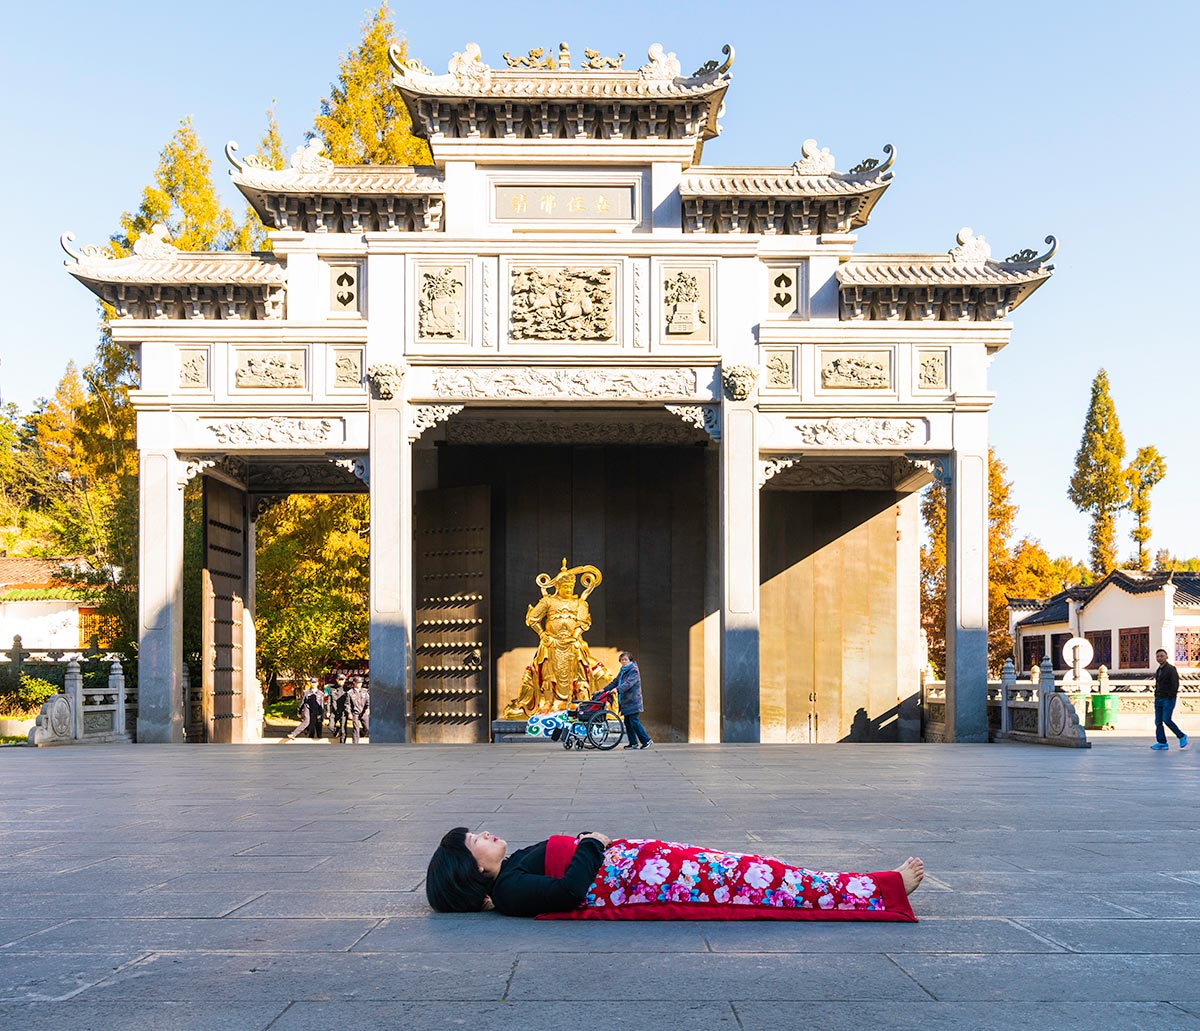 Chun Hua Catherine Dong celebrates her death and sleeps in front of a white temple in Mountain JiuHua, China